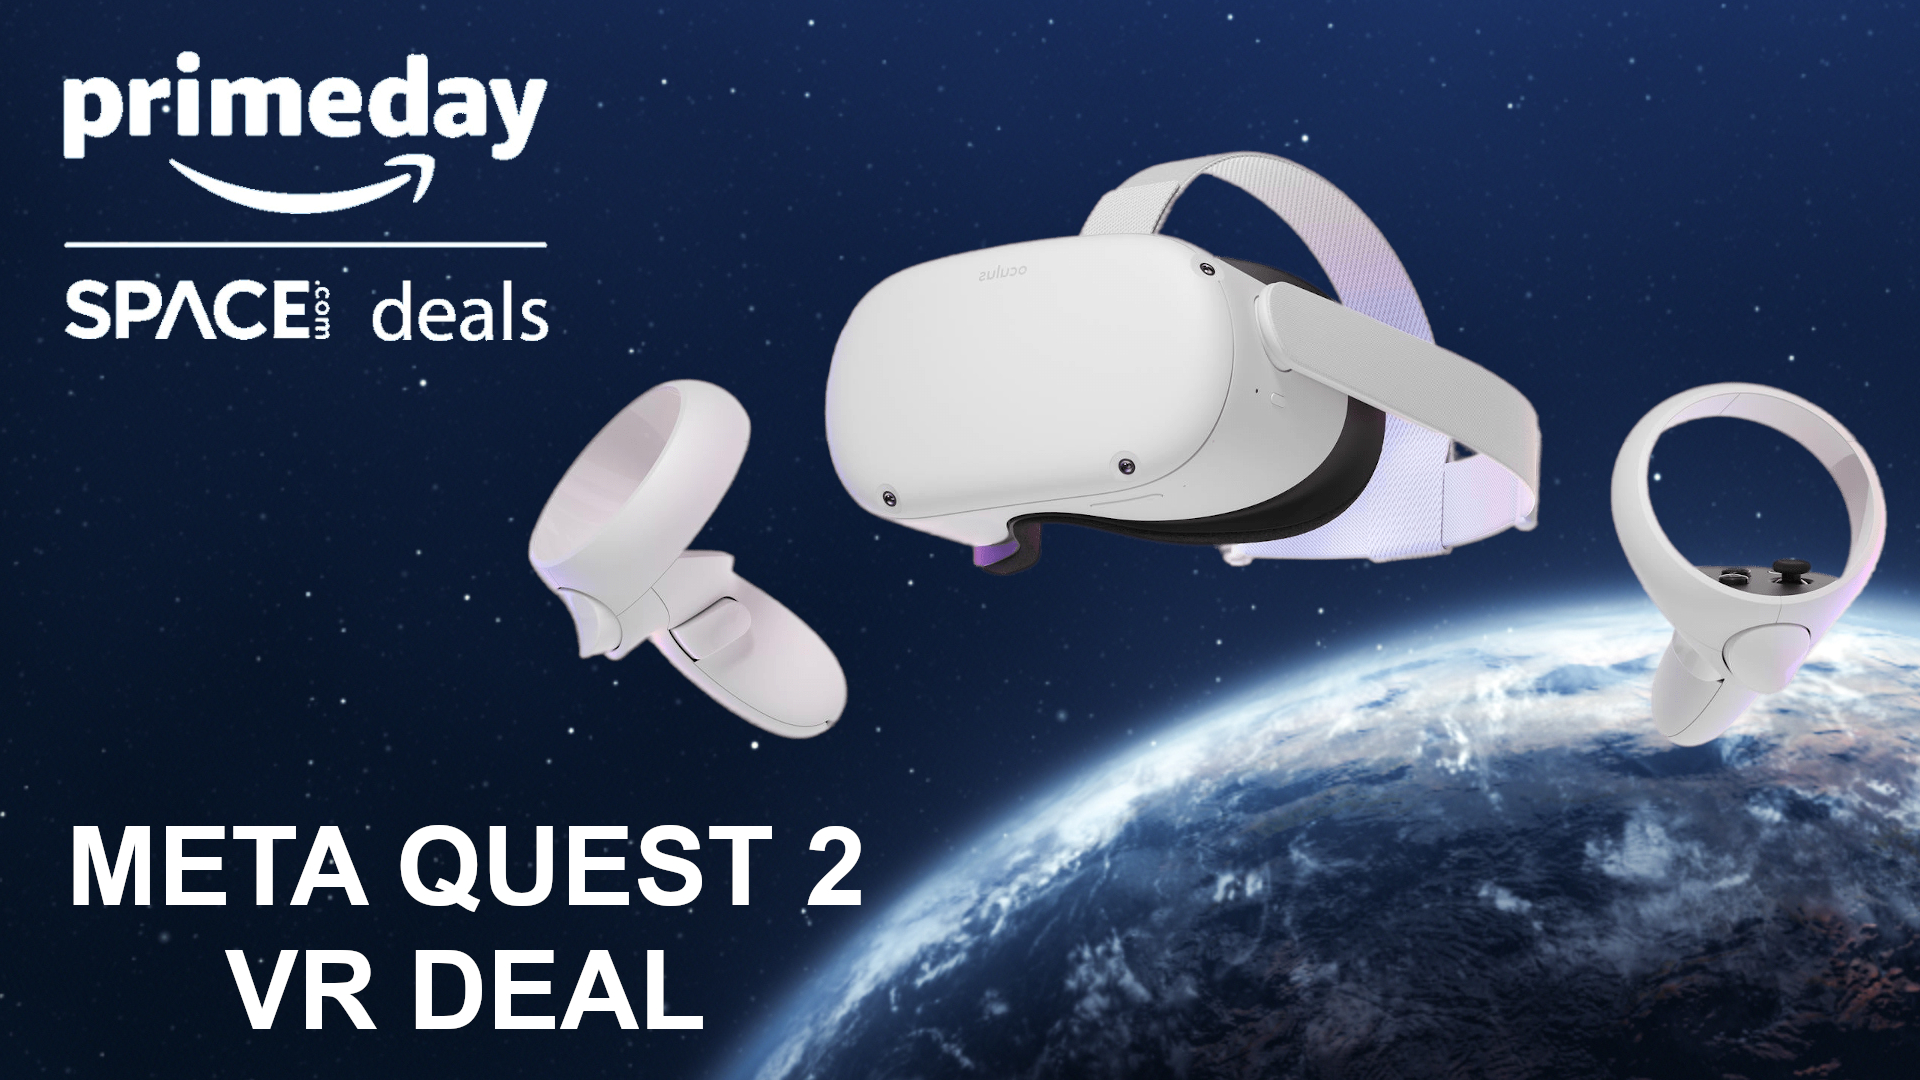 Oculus Quest 2 Black Friday deal: Get a free $50 gift card with your  headset